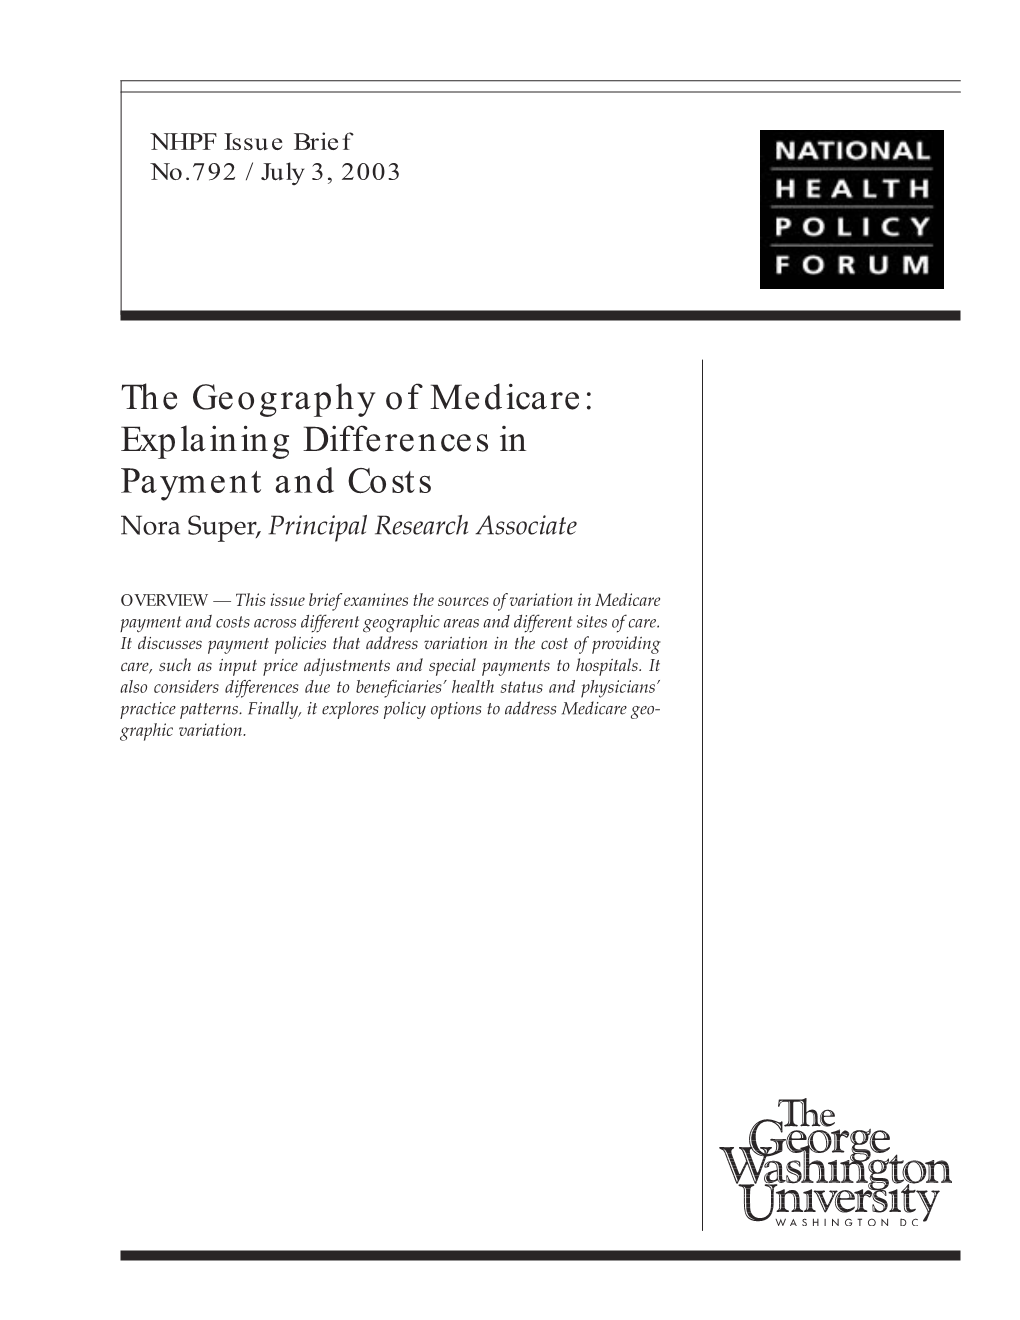 The Geography of Medicare: Explaining Differences in Payment and Costs Nora Super, Principal Research Associate